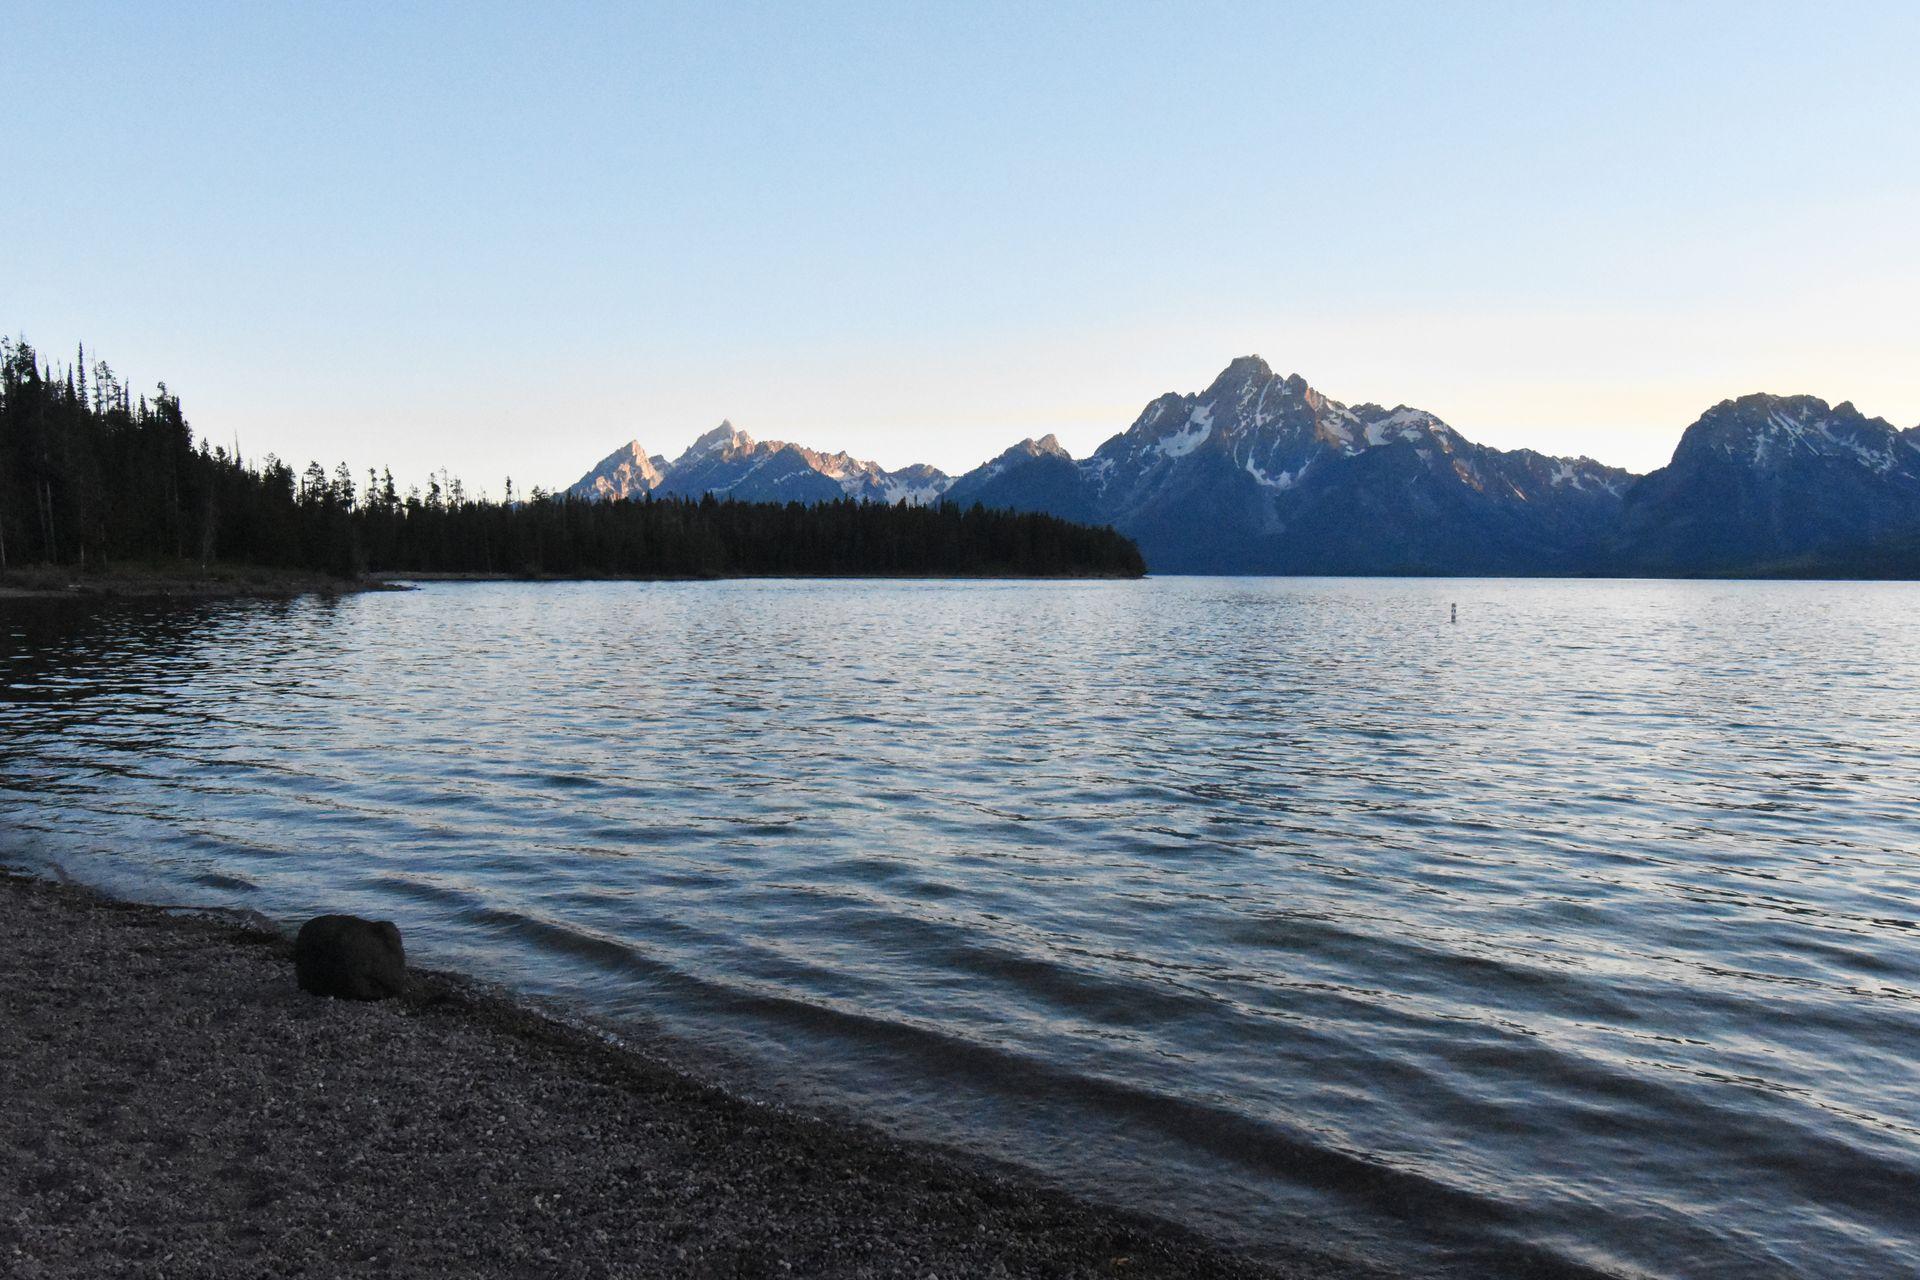 A view of Colter Bay Beach with the Grand Teton Mountains across the lake. The lighting is close to sunset.